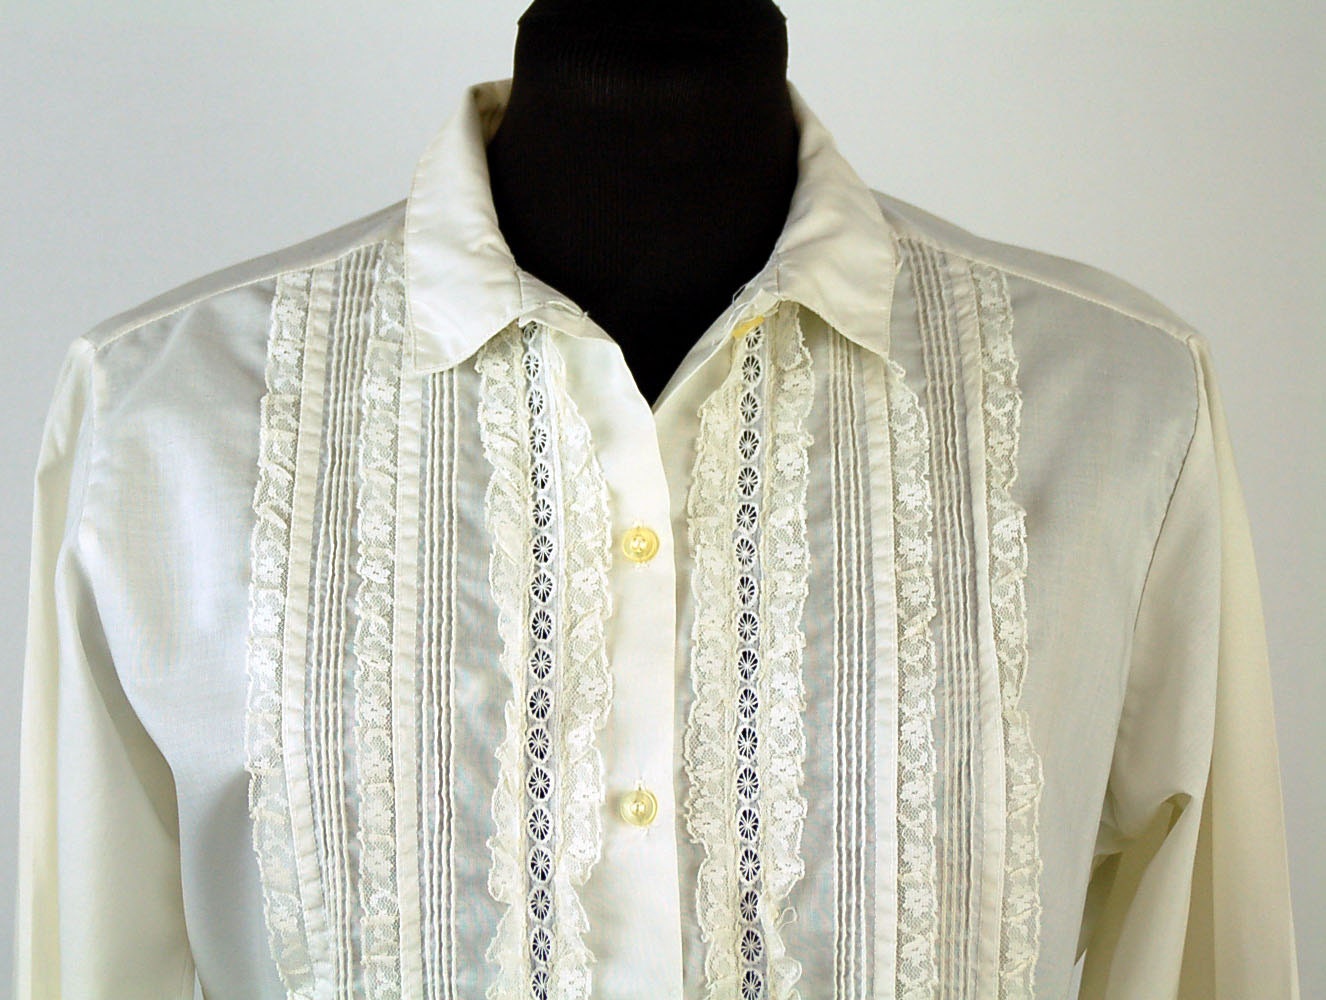 1960s blouse, cream white blouse, lace ruffle front, pintuck pleats, open lace work, Donnkenny, Size M